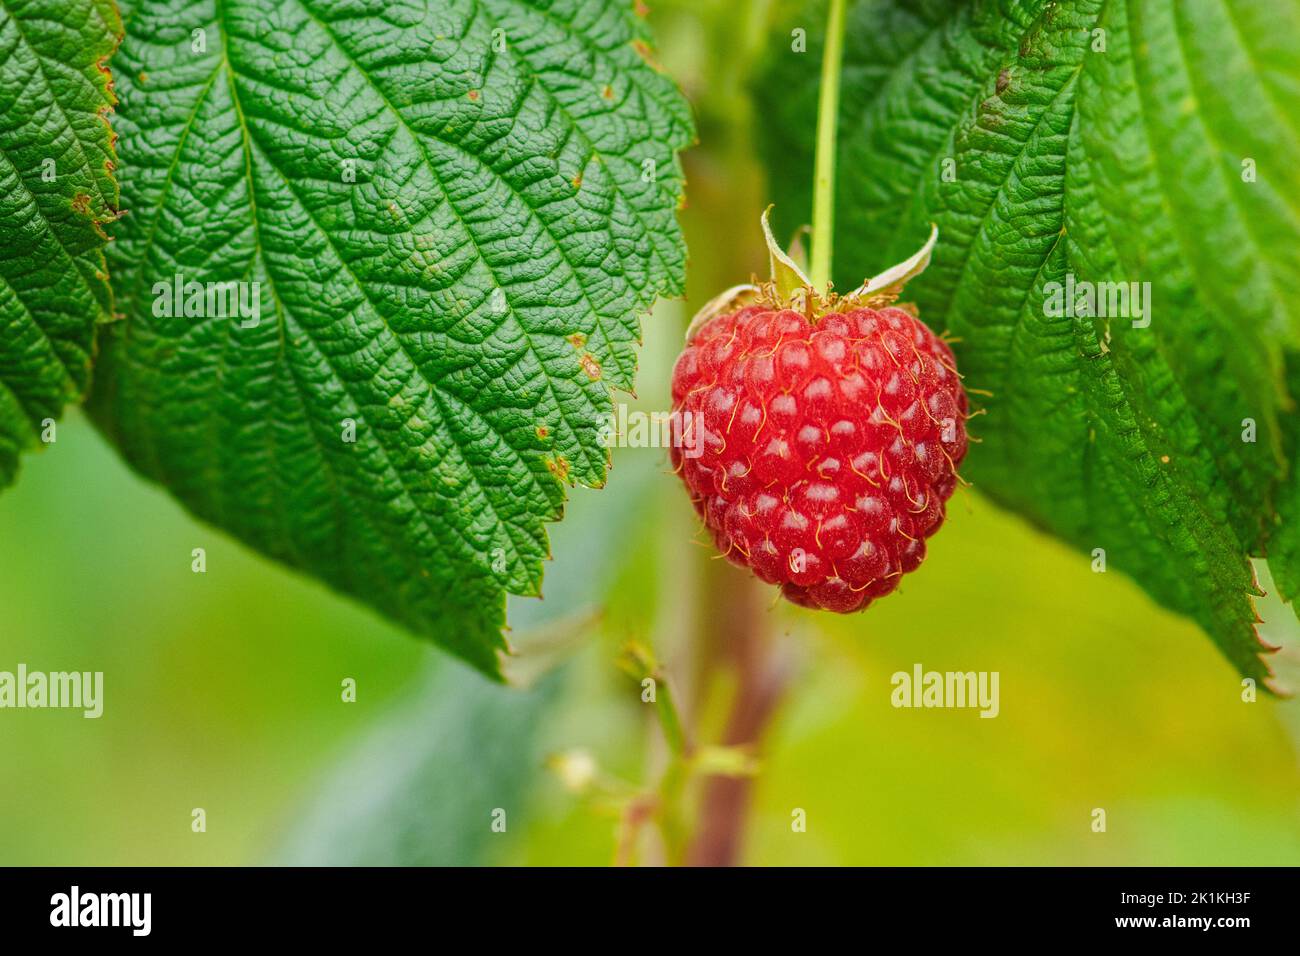 Beautiful red-fruited ripe raspberries hanging on the green plant. Close up Stock Photo